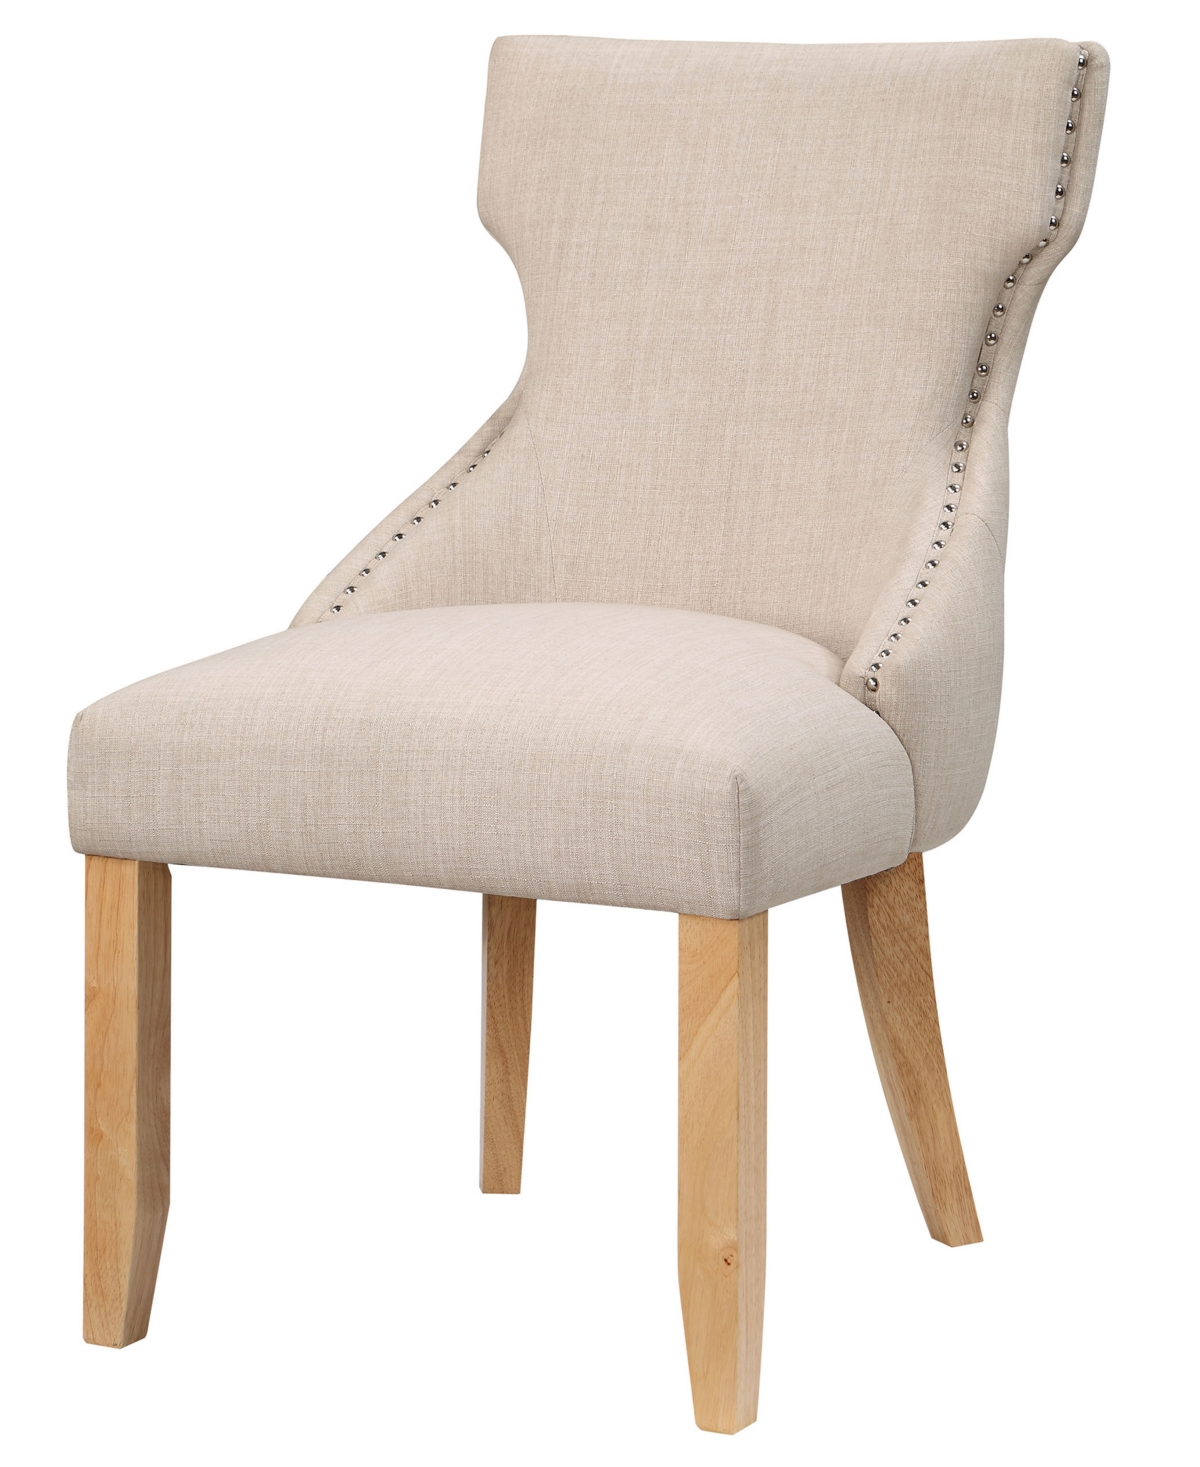 Furniture Of America Allia Tufted Wingback Side Chair 2 Piece Set In Ivory